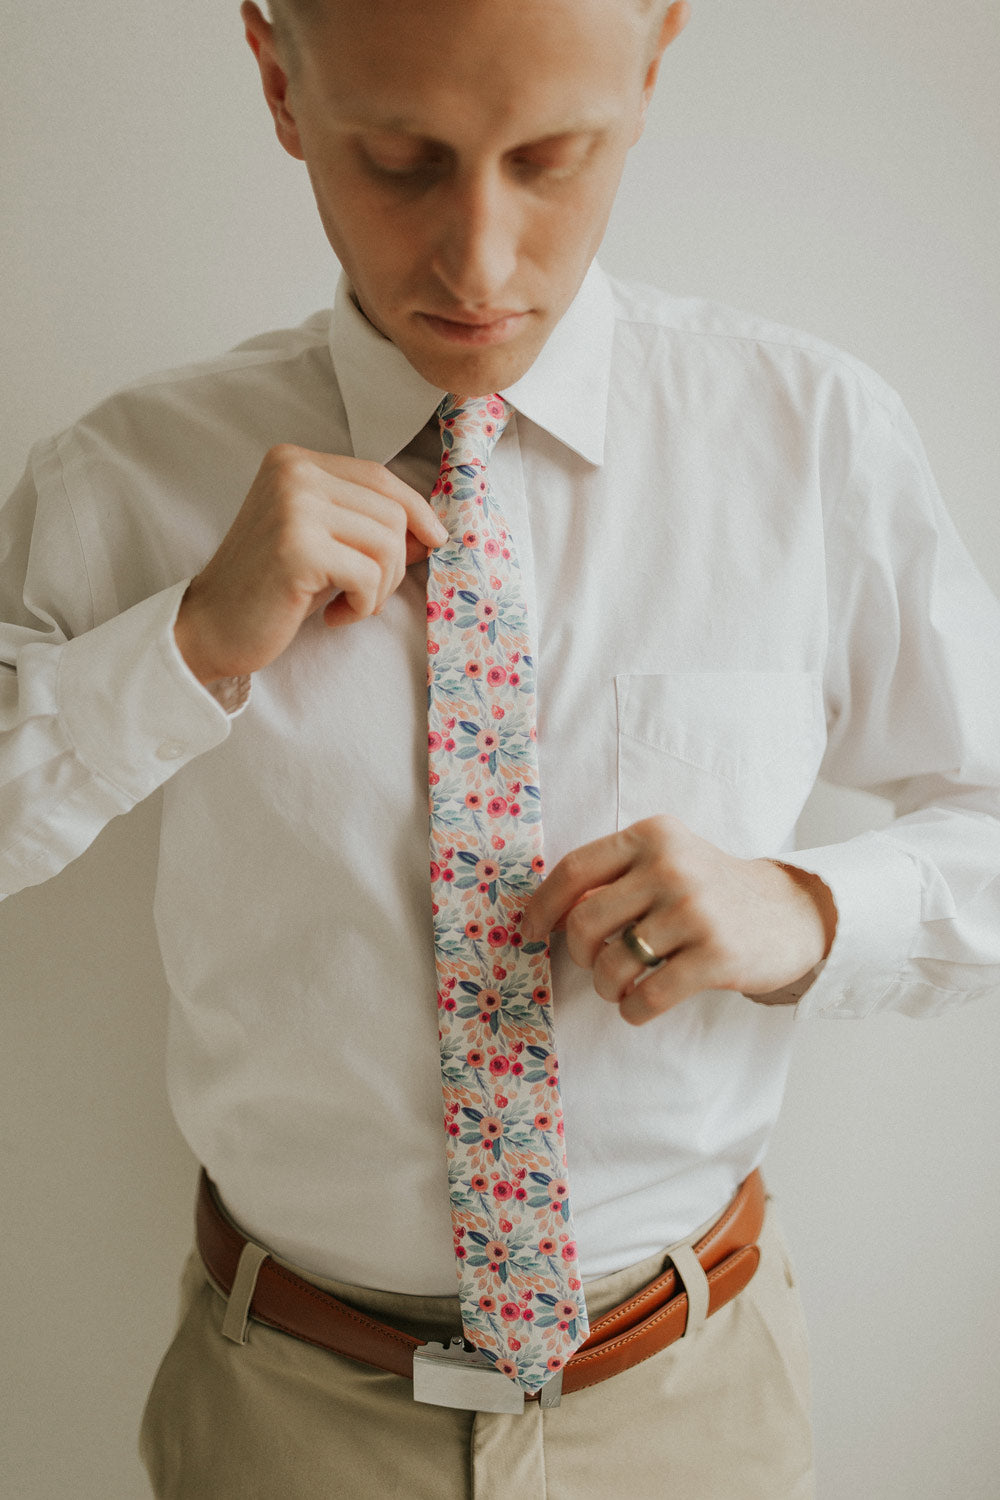 Hermosa tie worn with a white shirt, brown belt and khaki pants.